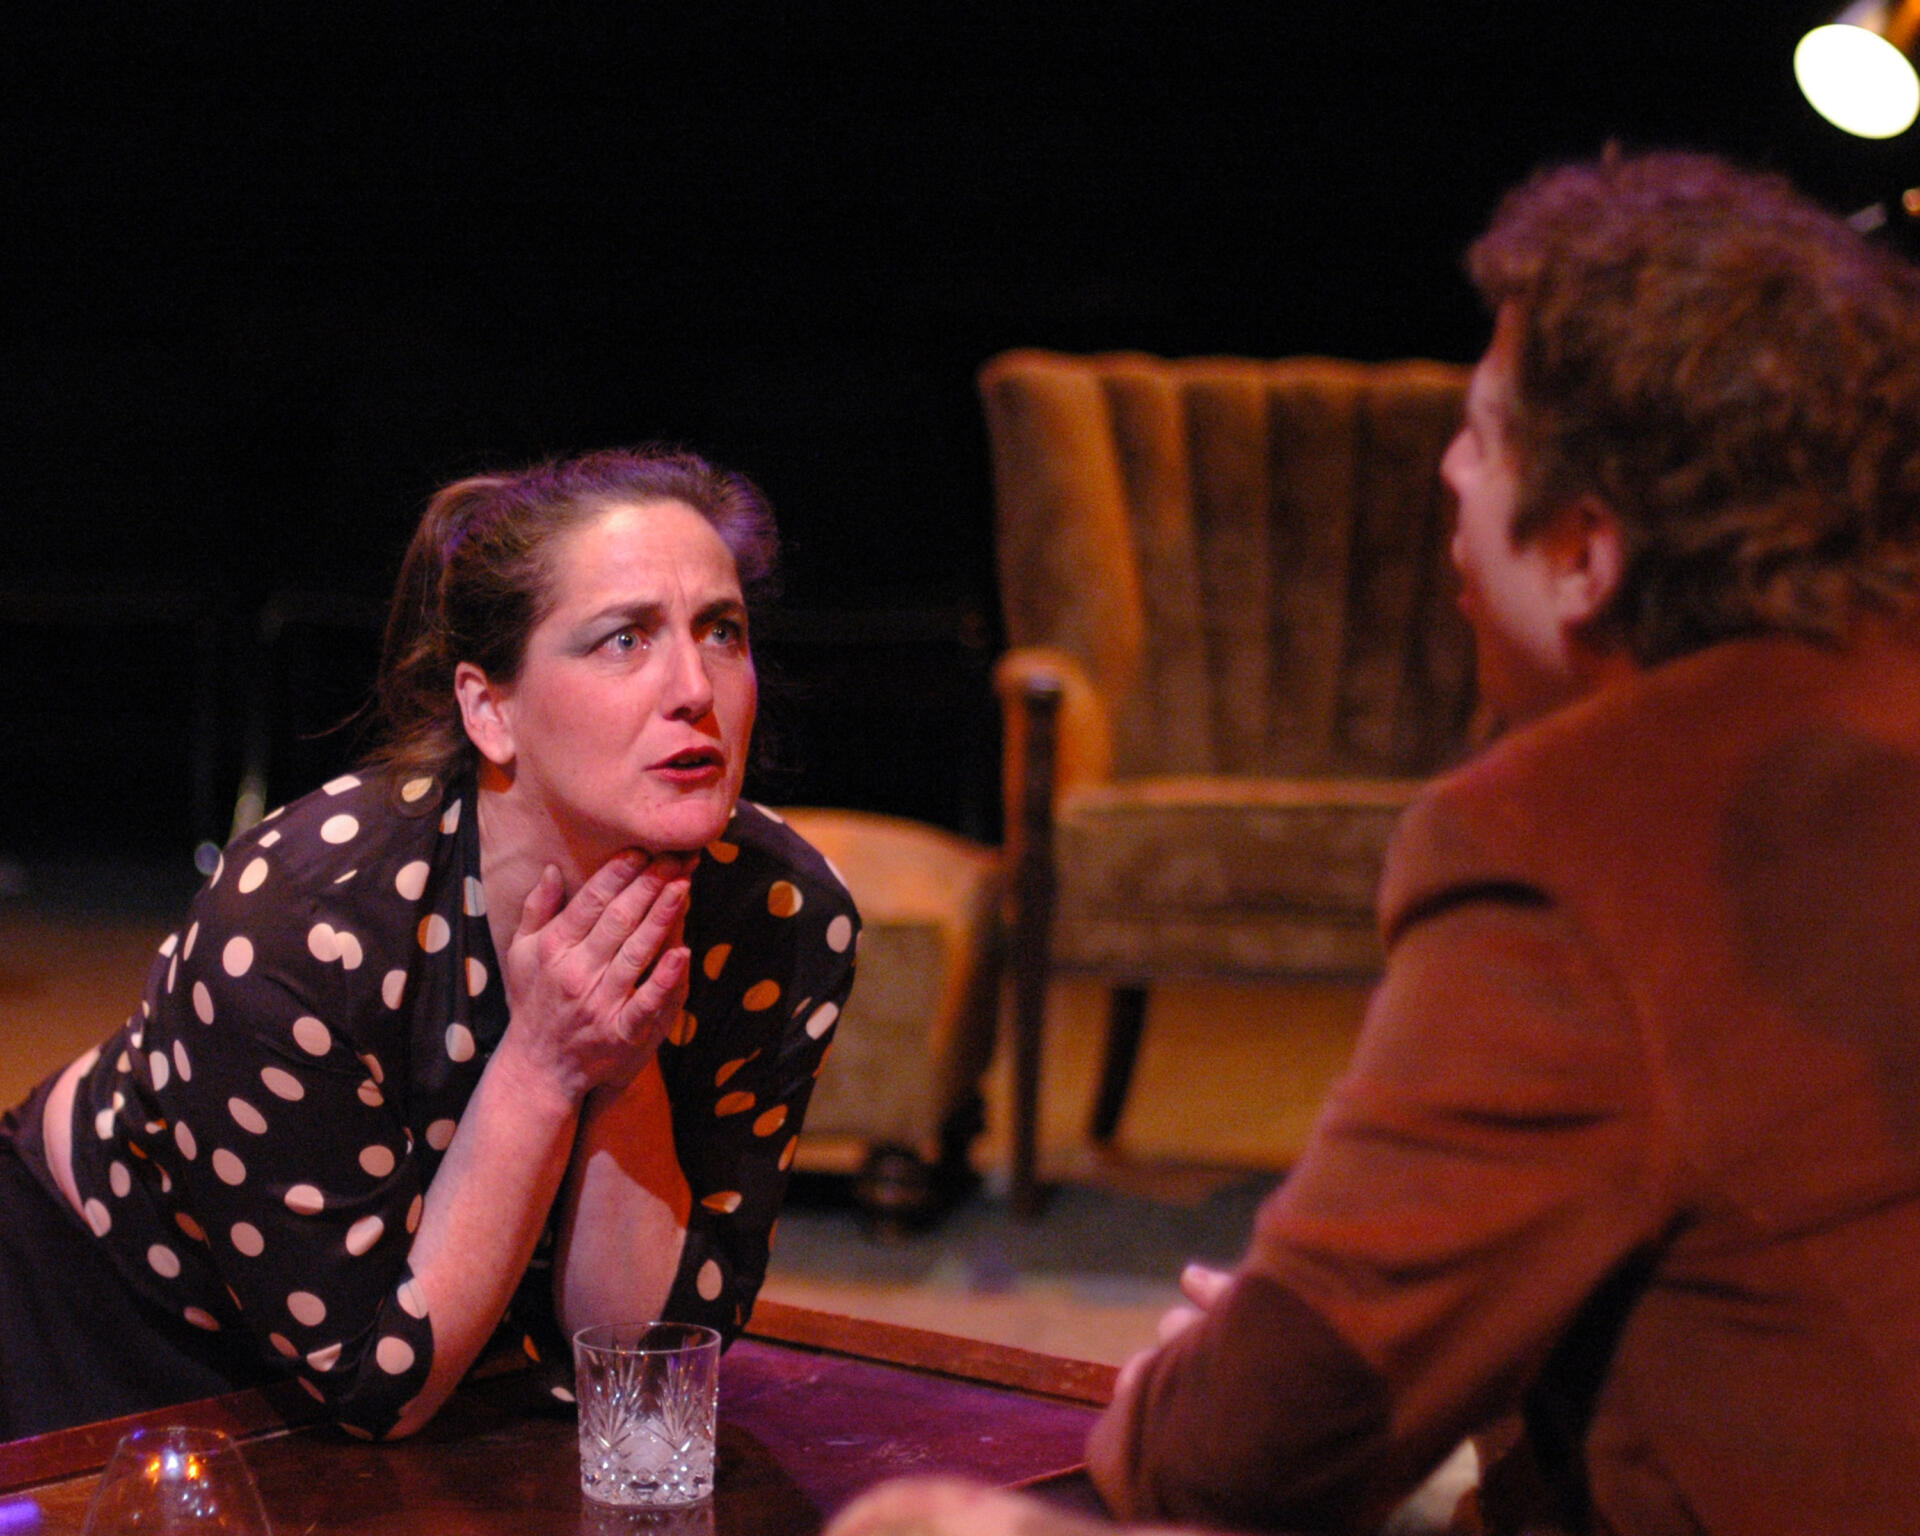 Erin Day and David James Dodge in Who's Afraid of Virginia Woolf? - 2005